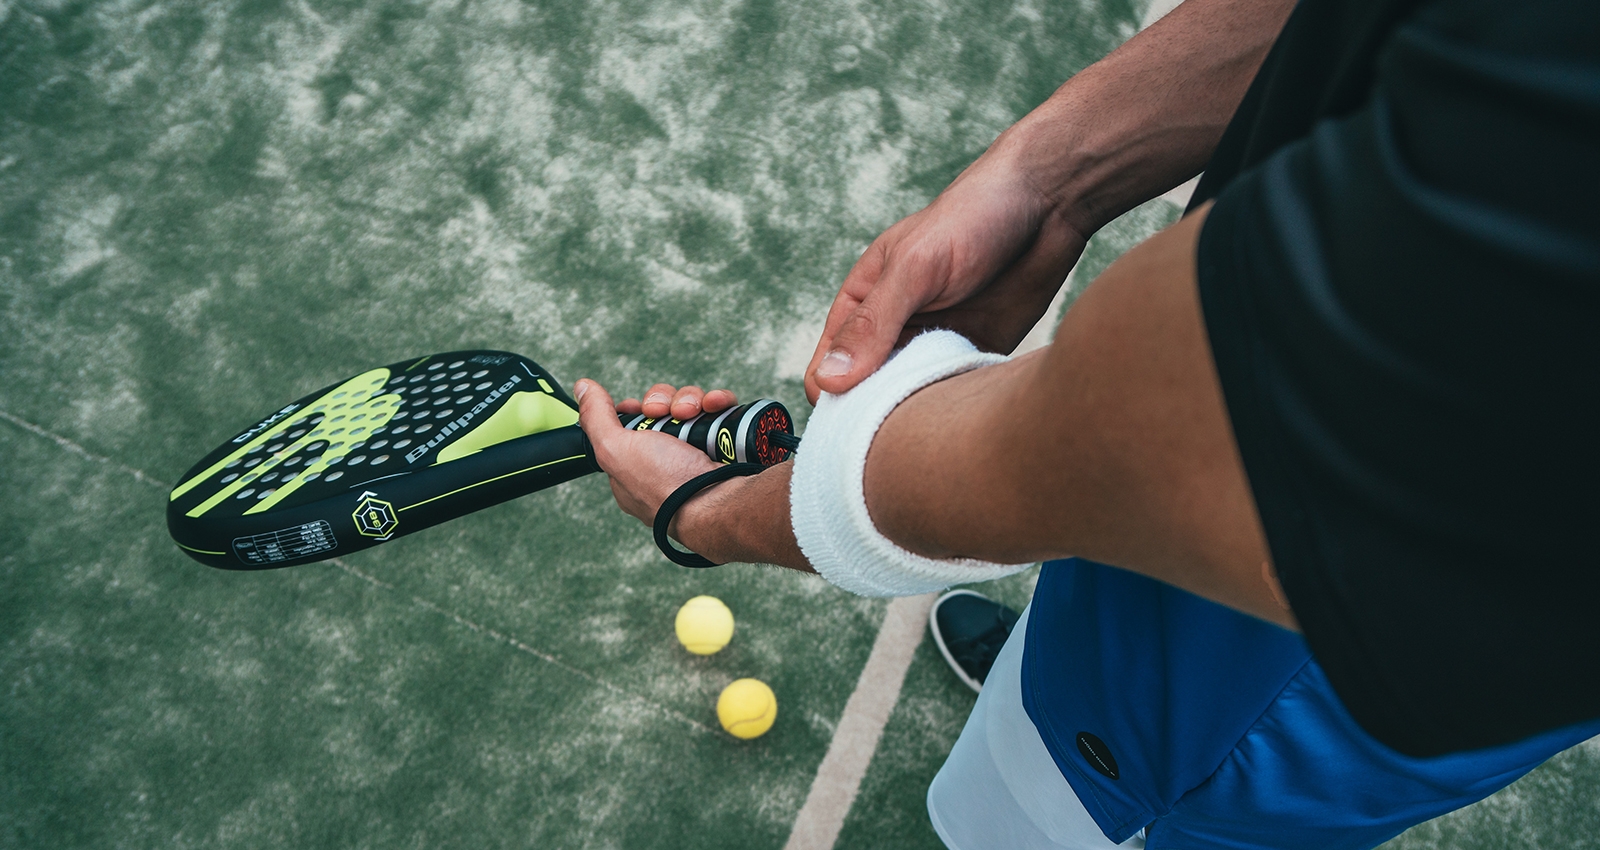 The Benefits of Tennis for the Athlete